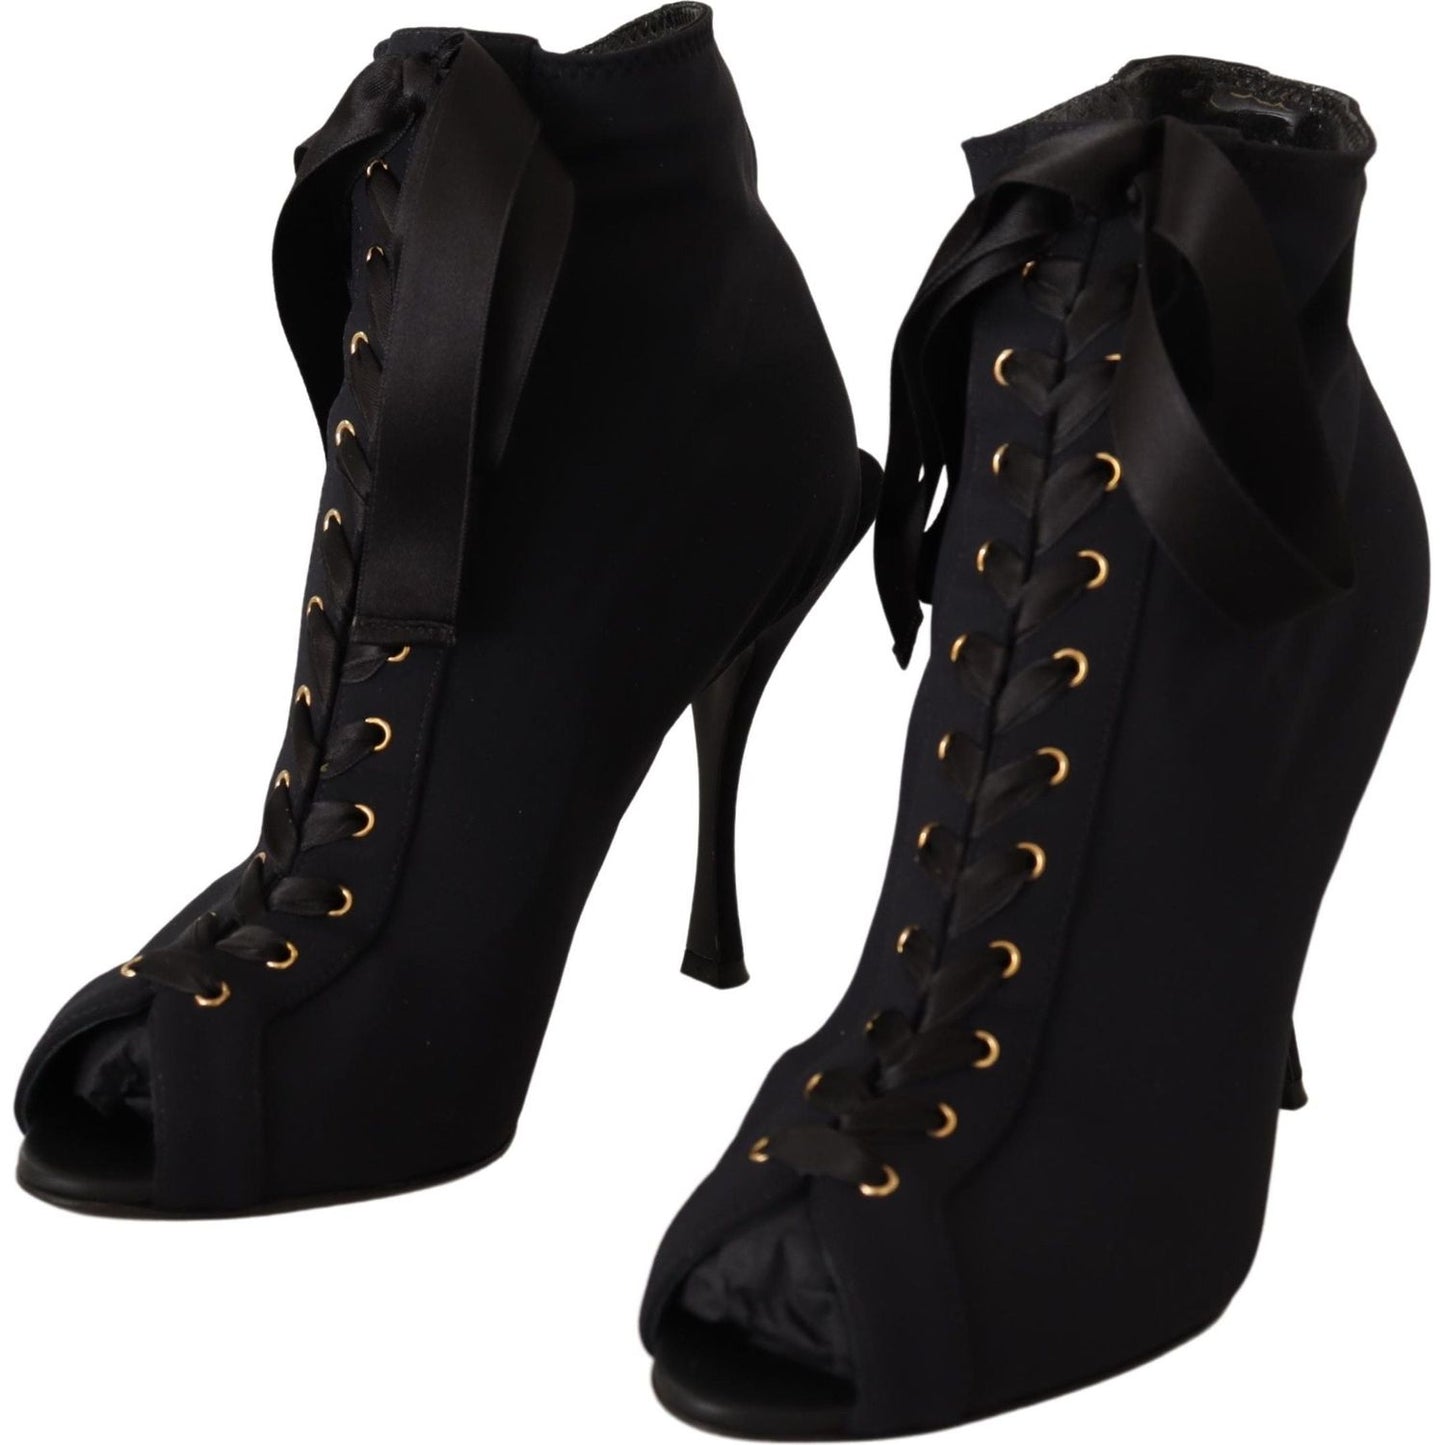 Dolce & Gabbana Elegant Ankle Open Toe Heel Boots black-stretch-short-ankle-boots-shoes-2